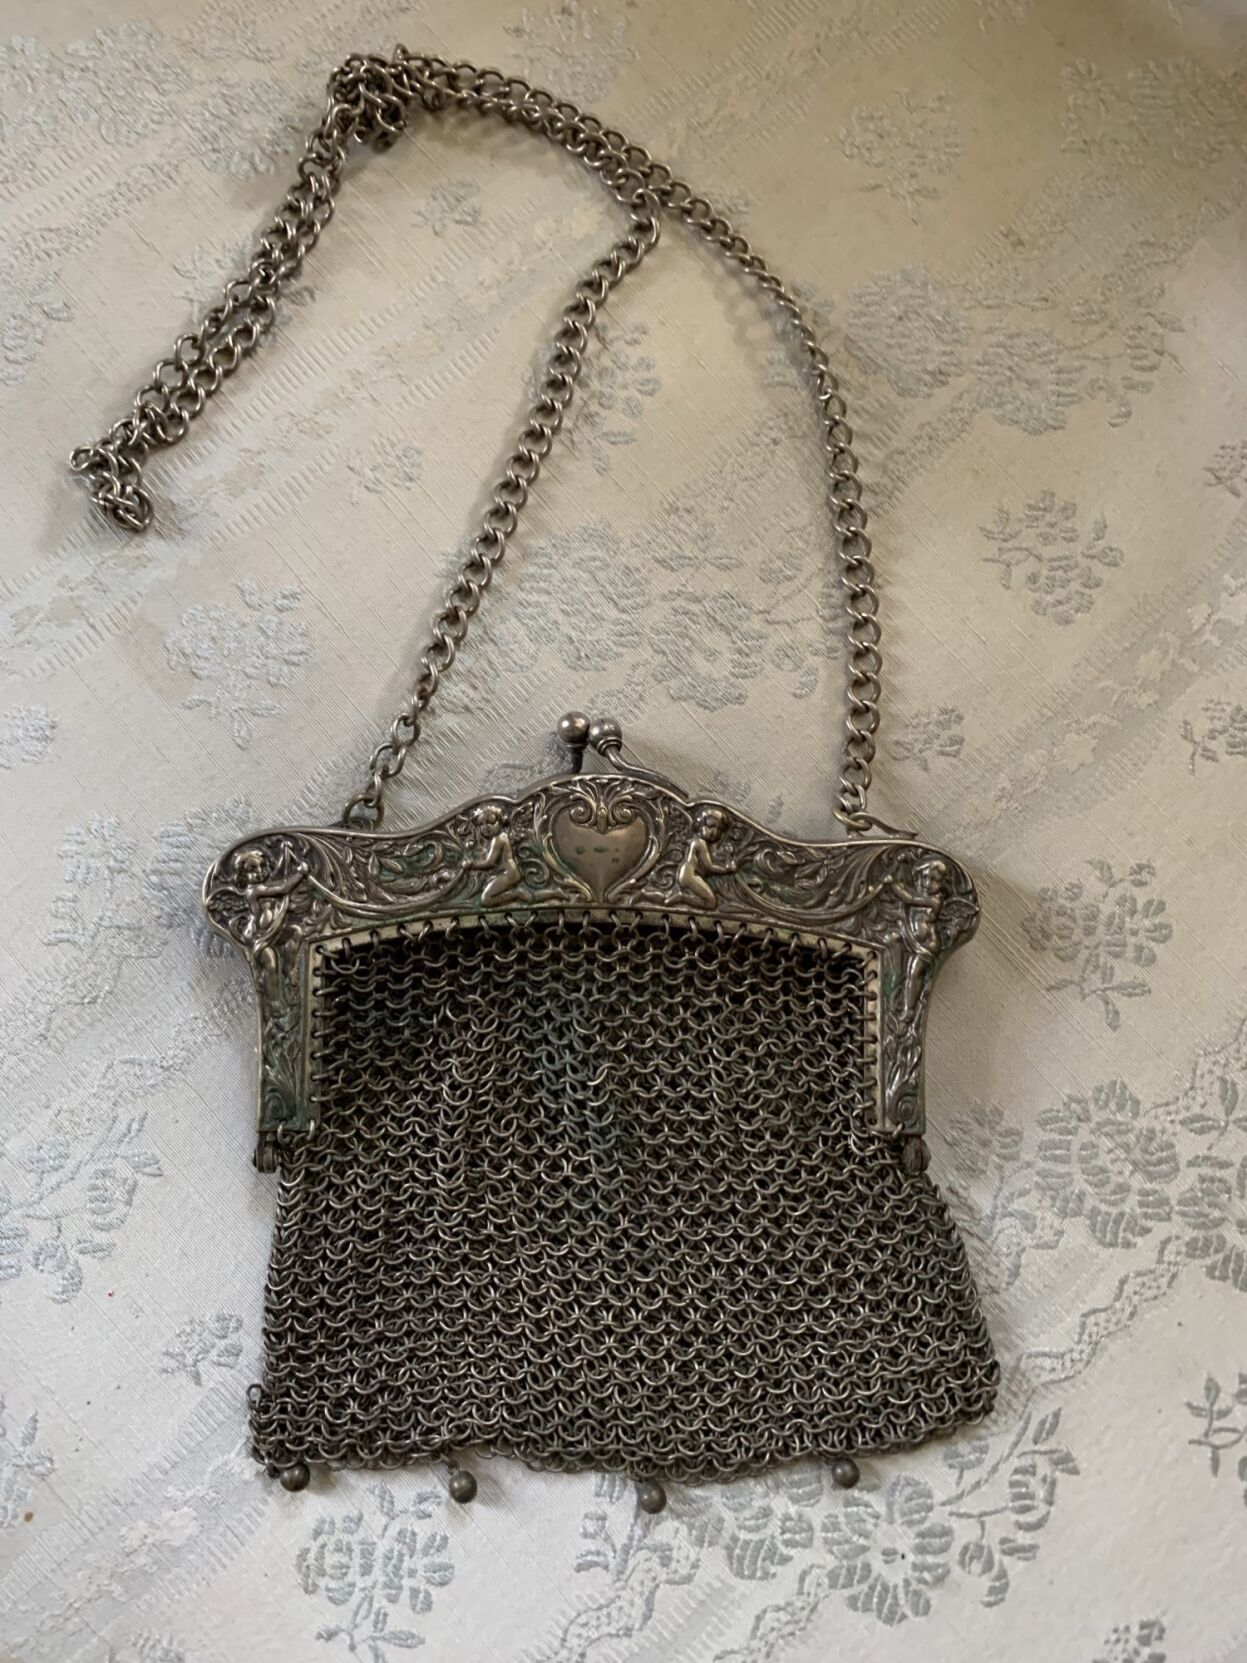 Antique silver mesh Evening bag & coin purse German with Hallmarked Company  Name | eBay